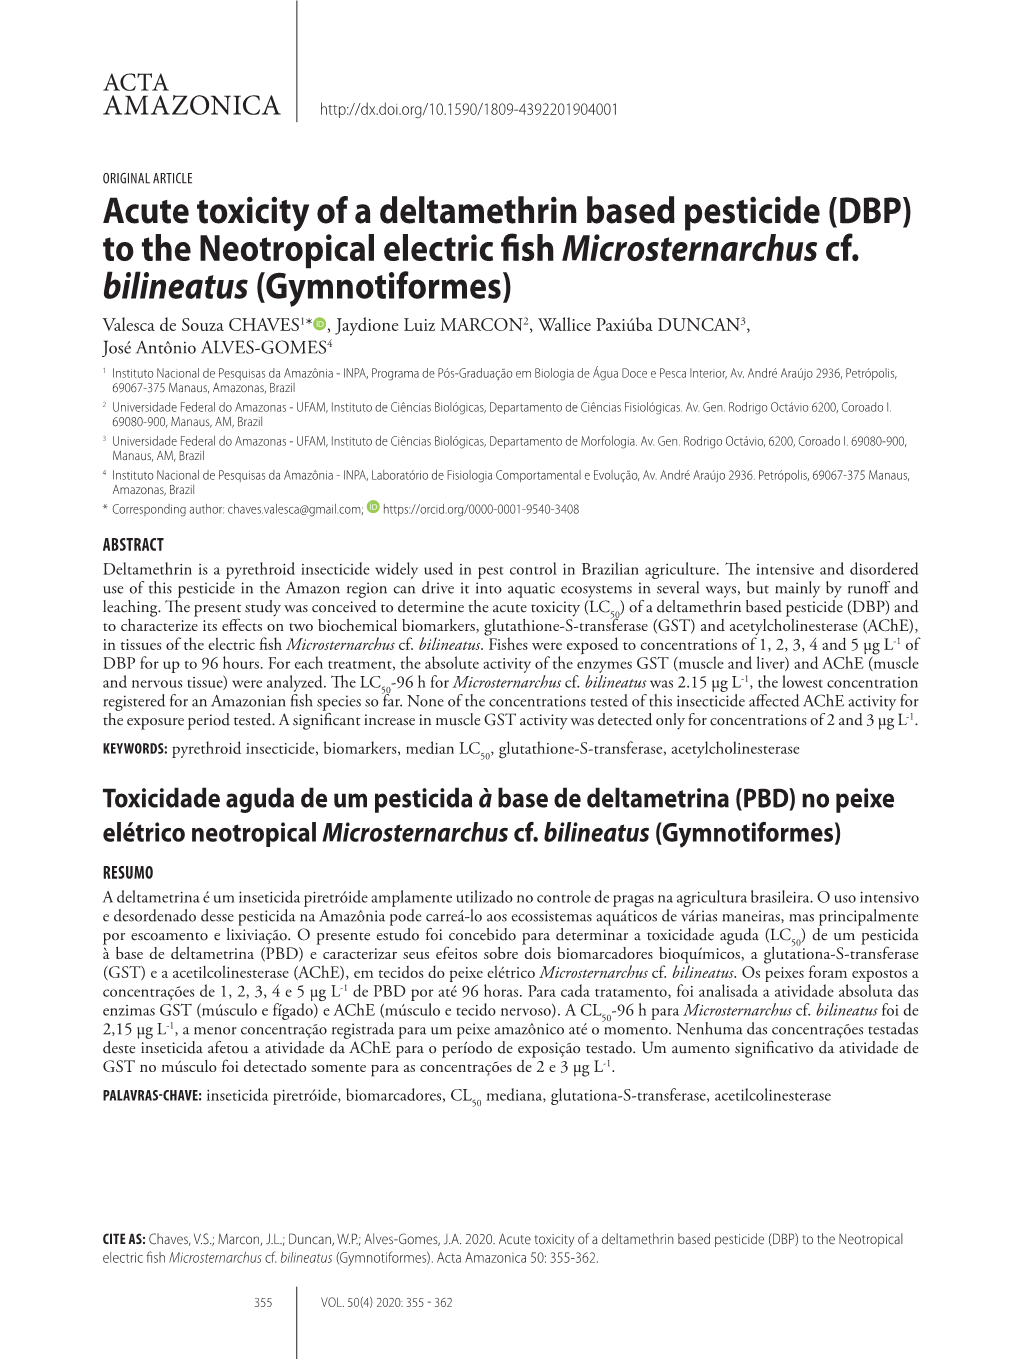 Acute Toxicity of a Deltamethrin Based Pesticide (DBP) to the Neotropical Electric Fishmicrosternarchus Cf